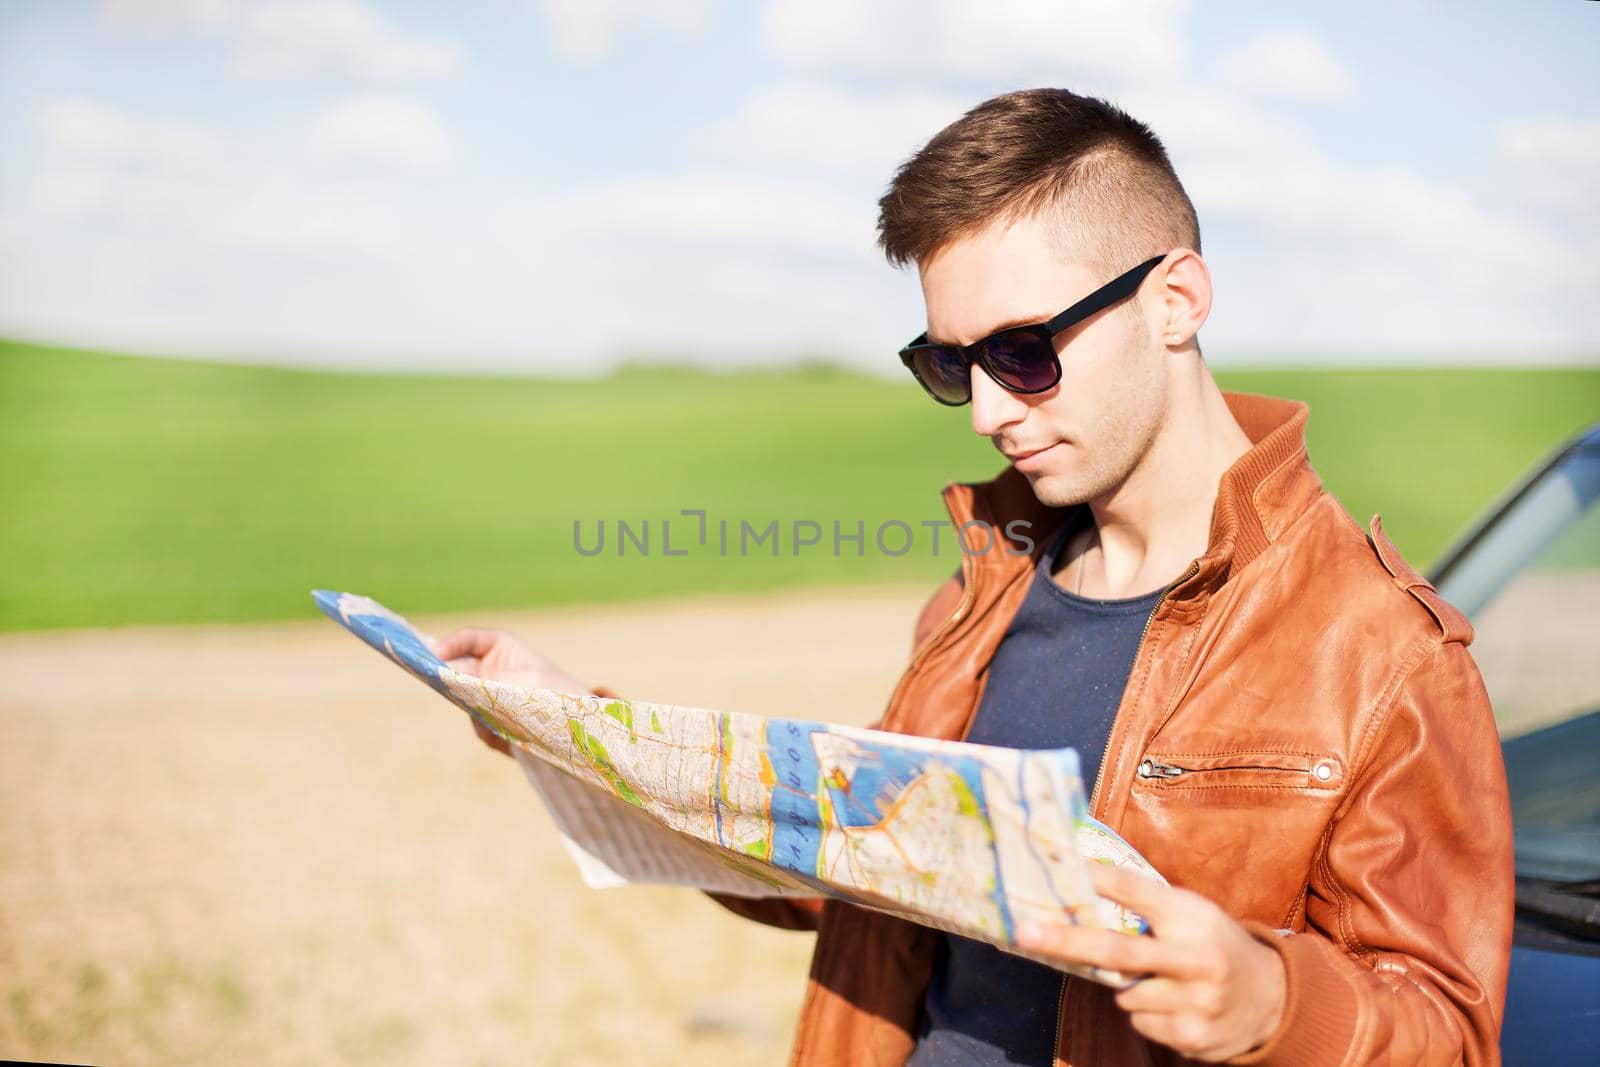 Photo of a traveler parked his car by the side of a road, lost and reading the map. Focus on the map and male.